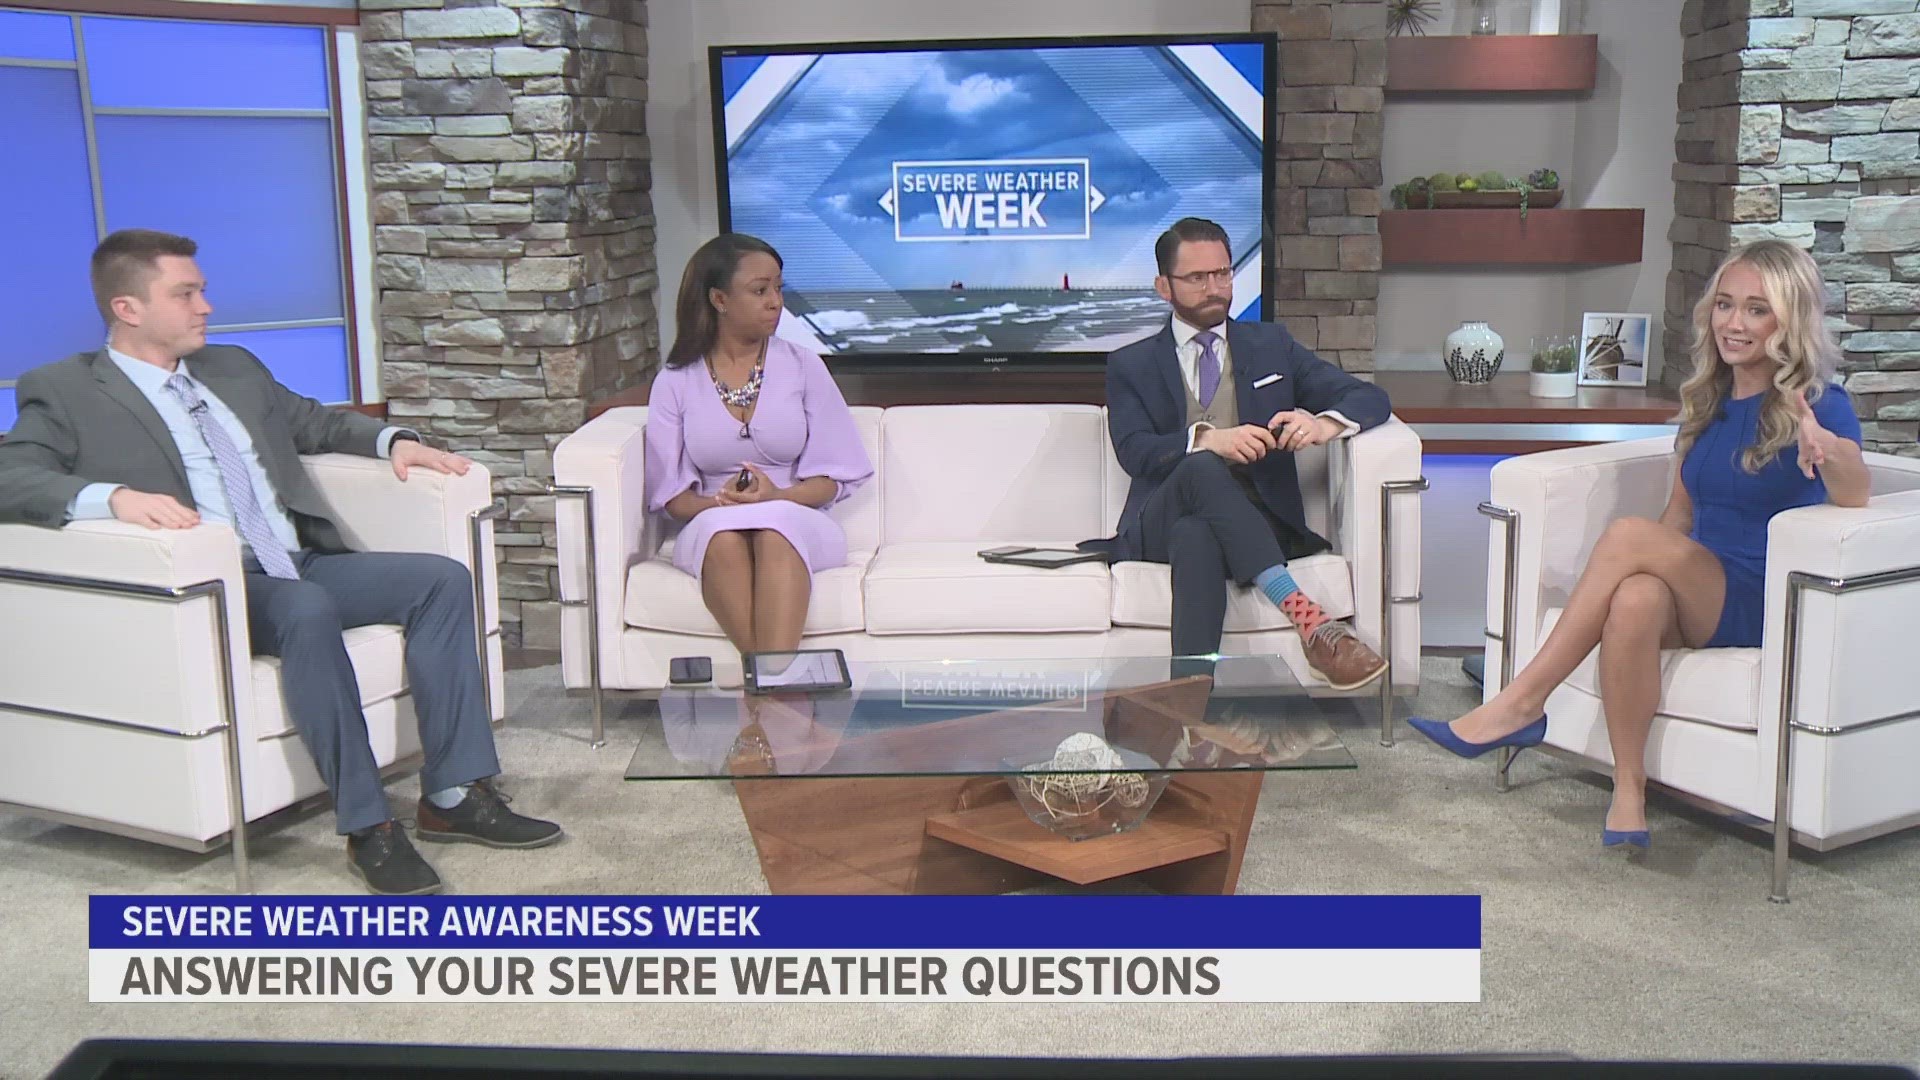 To wrap up Severe Weather Awareness Week, Meteorologists Sam Jacques and Blake Hansen are answering your severe weather questions.